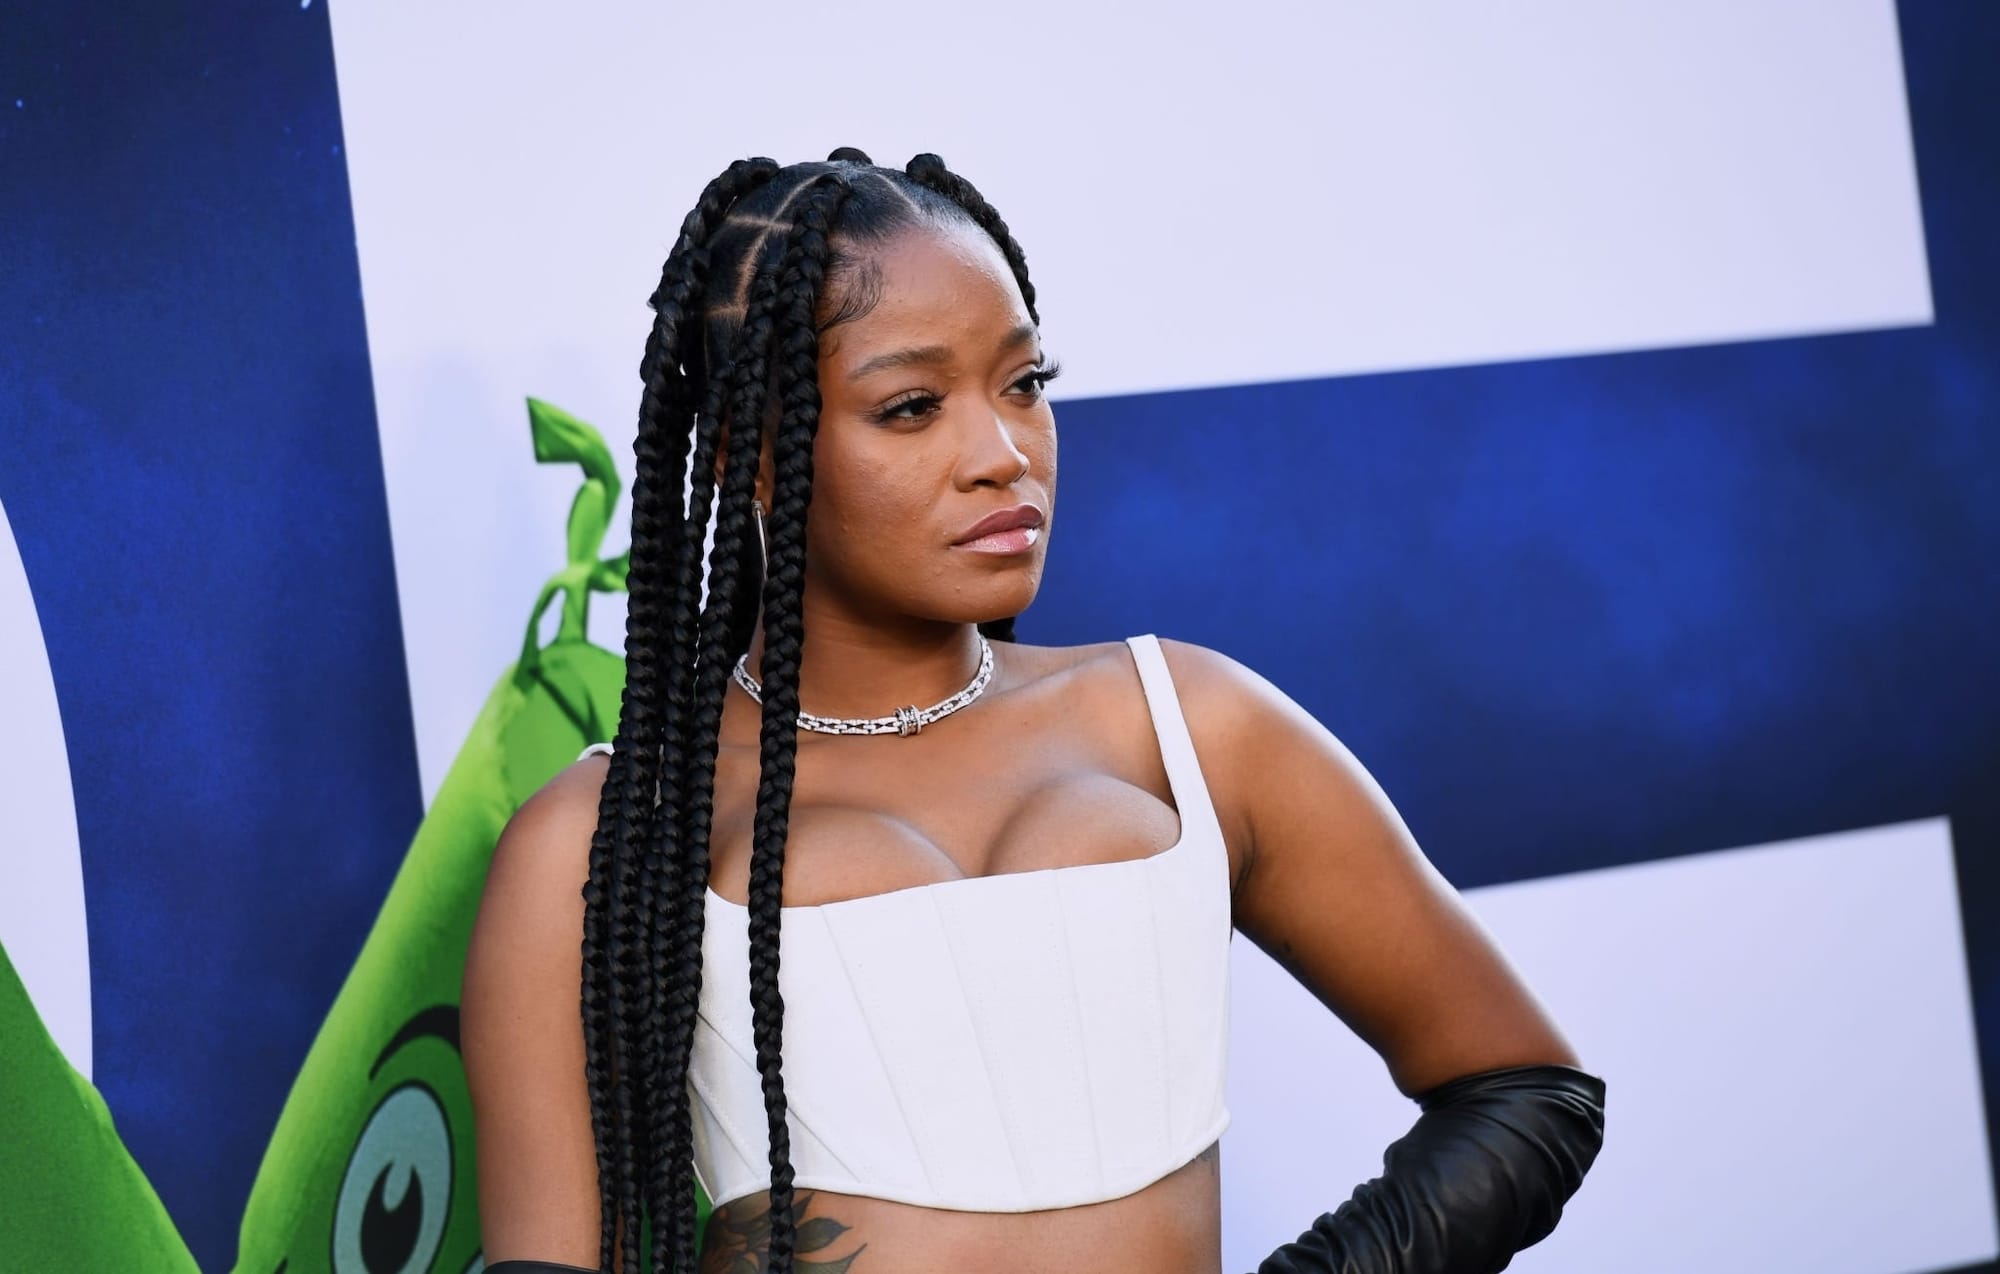 Keke Palmer on the red carpet for the world premiere of 'Nope' at TCL Chinese Theatre on July 18, 2022 in Hollywood, California.